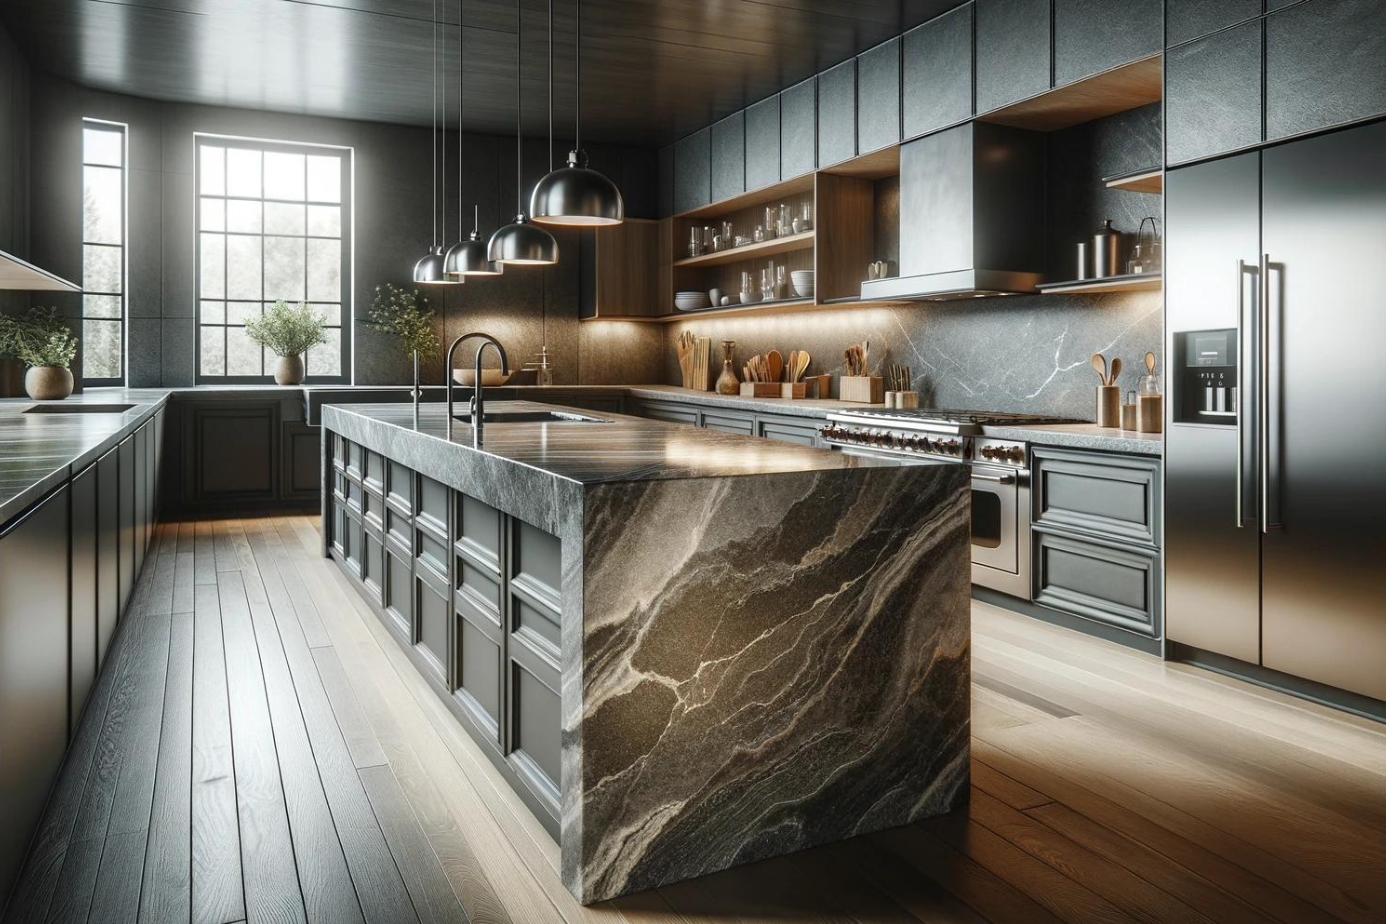 The soapstone kitchen countertop is perfect for modern kitchens, with its sleek charcoal gray look and delicate white streaks